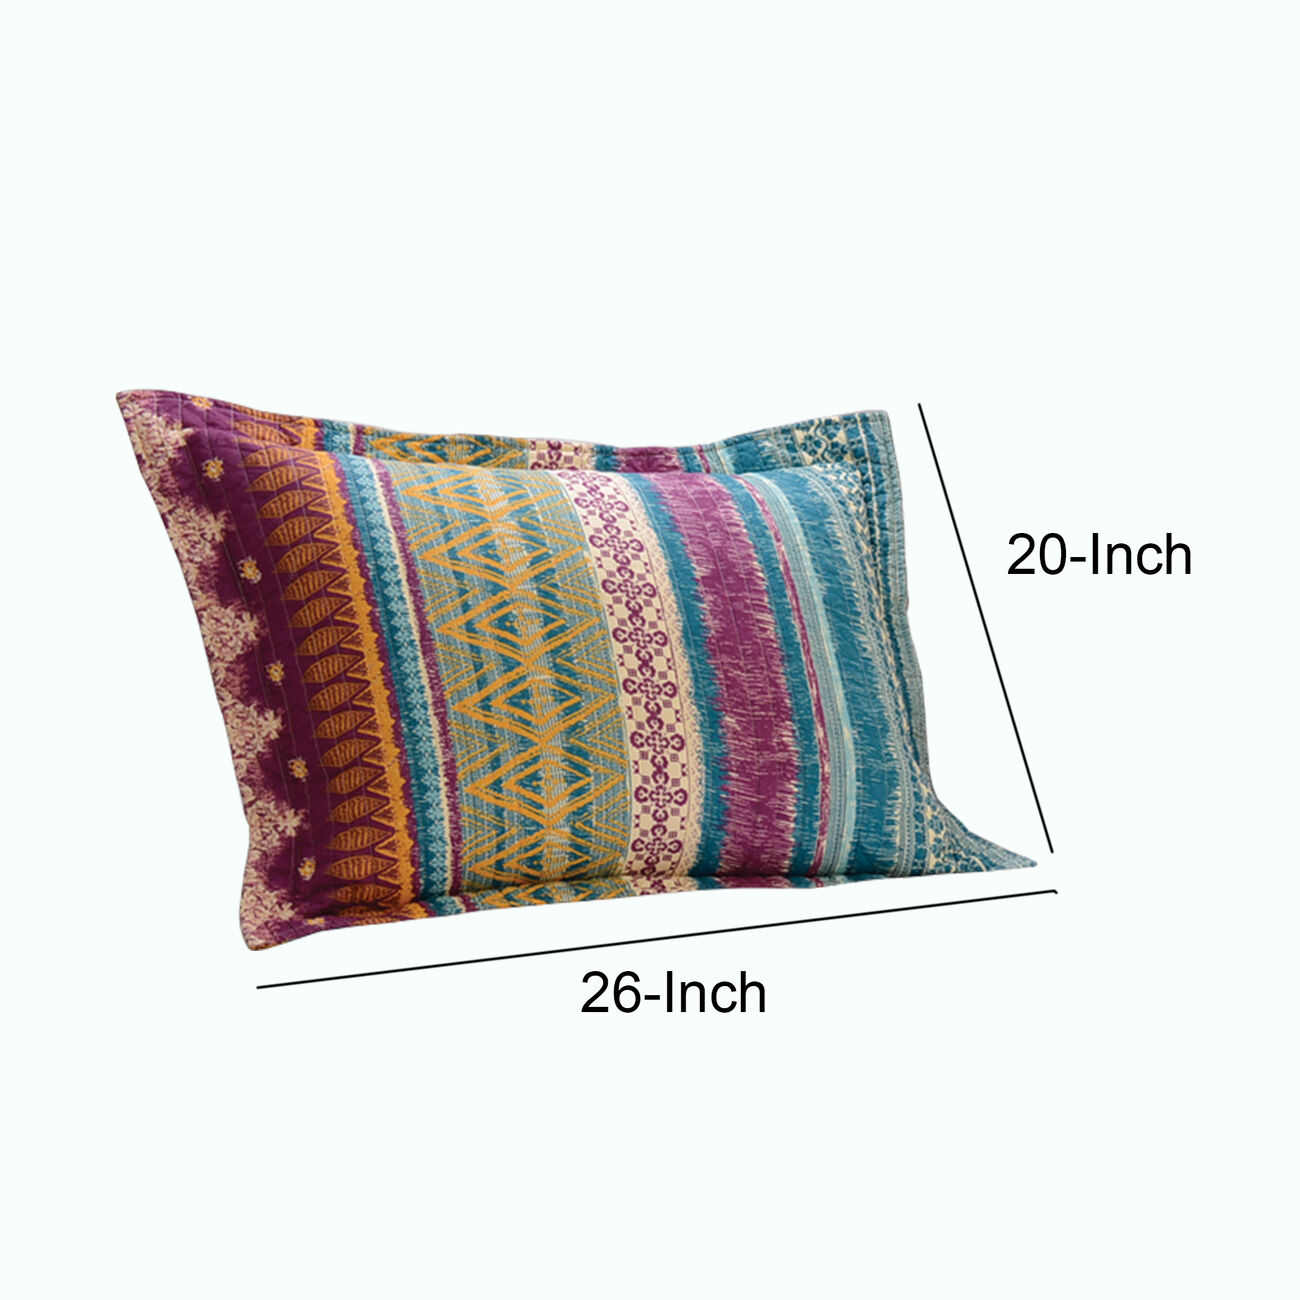 26 x 20 Cotton Filled Standard Sham with Tribal Motif Print, Multicolor